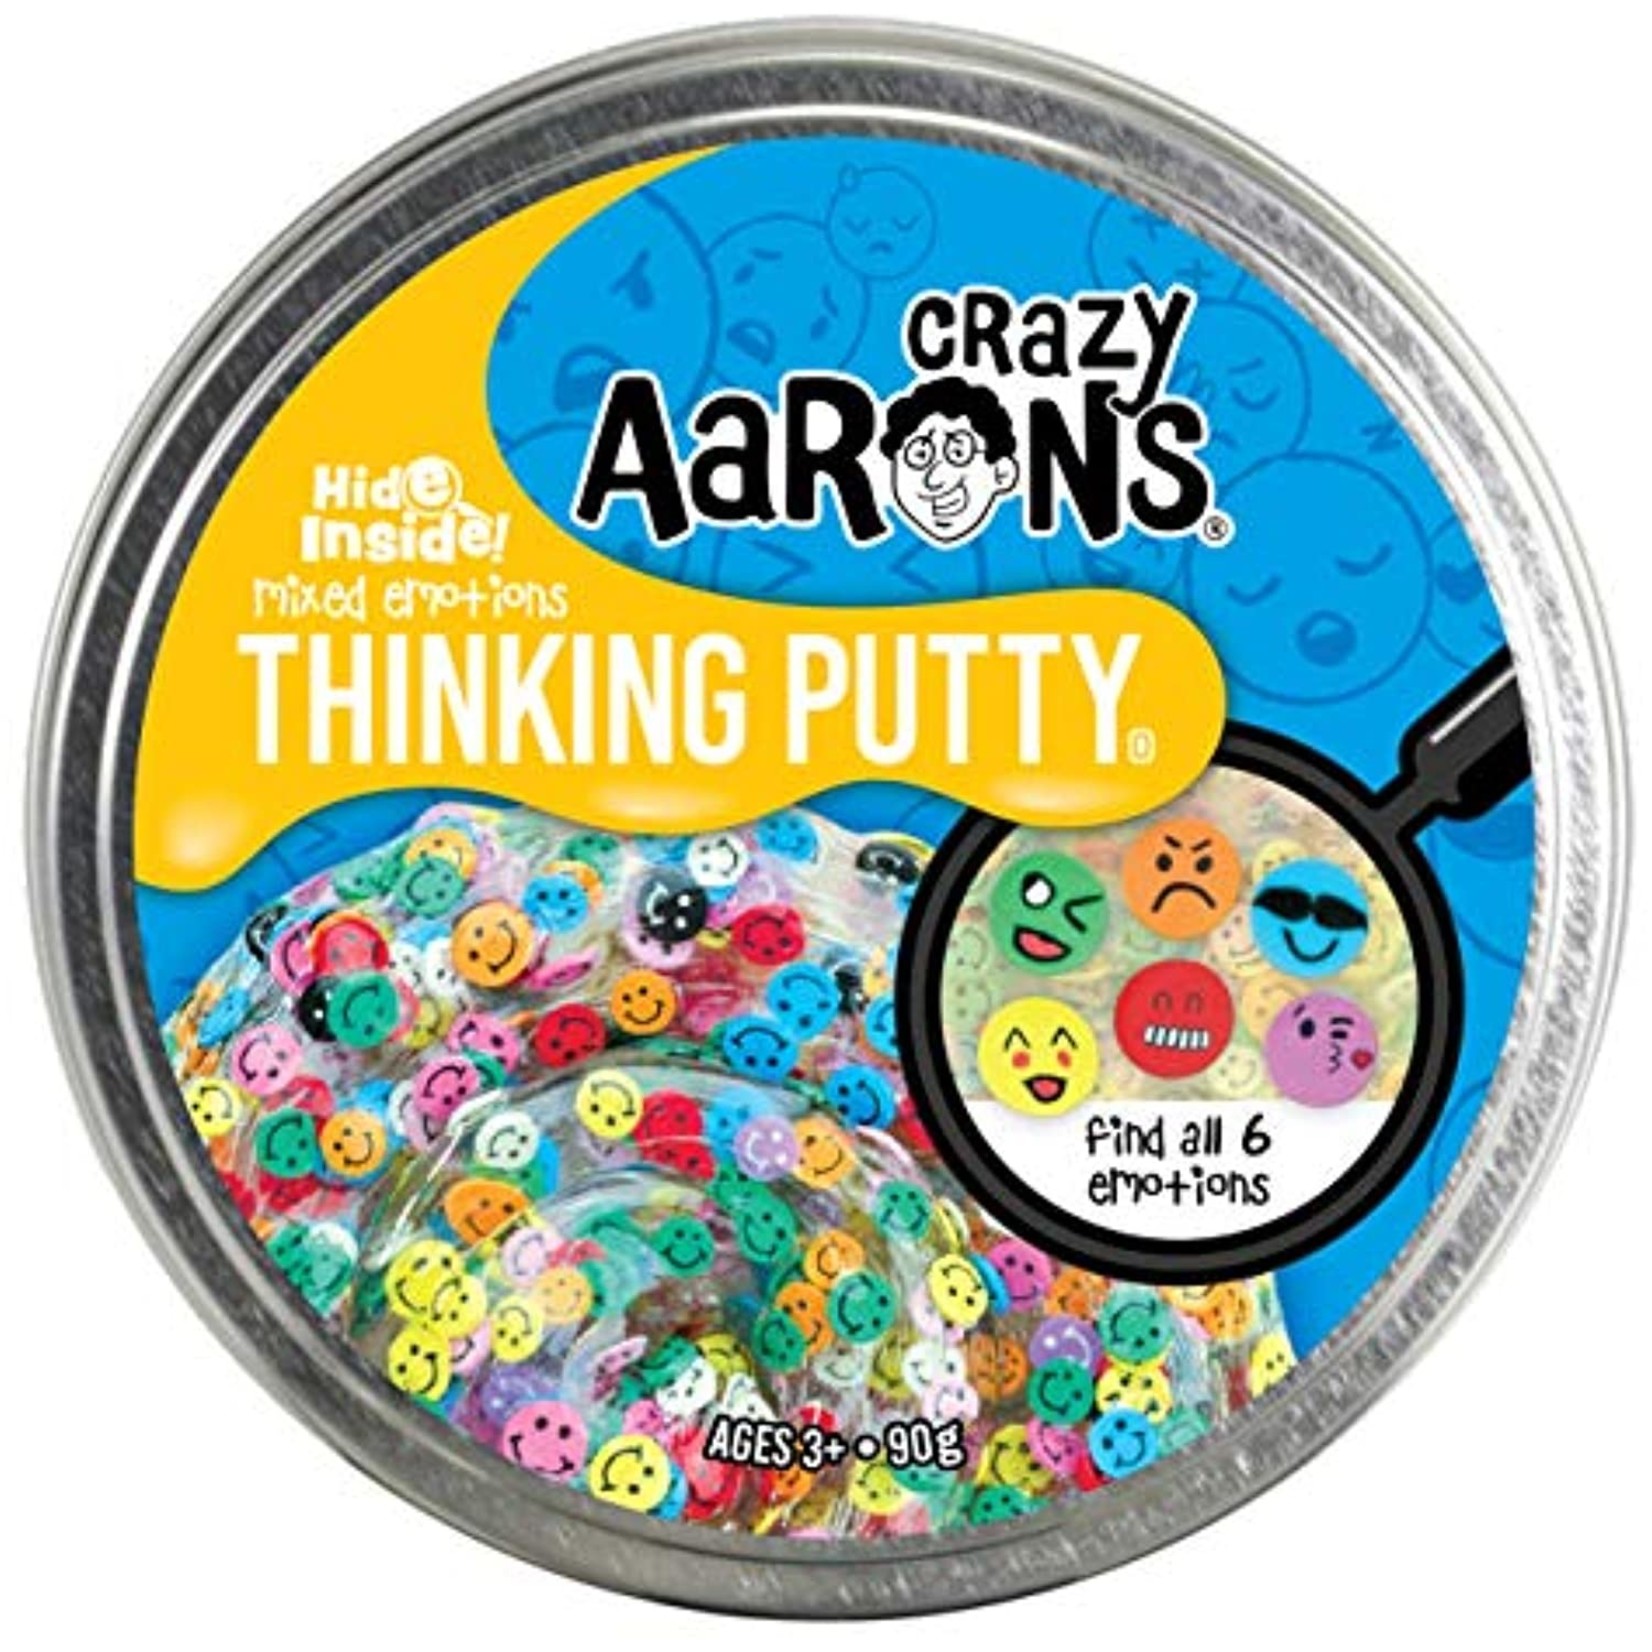 Crazy Aaron's Crazy Aaron's Mixed Emotions - Full Size 4" Thinking Putty Tin